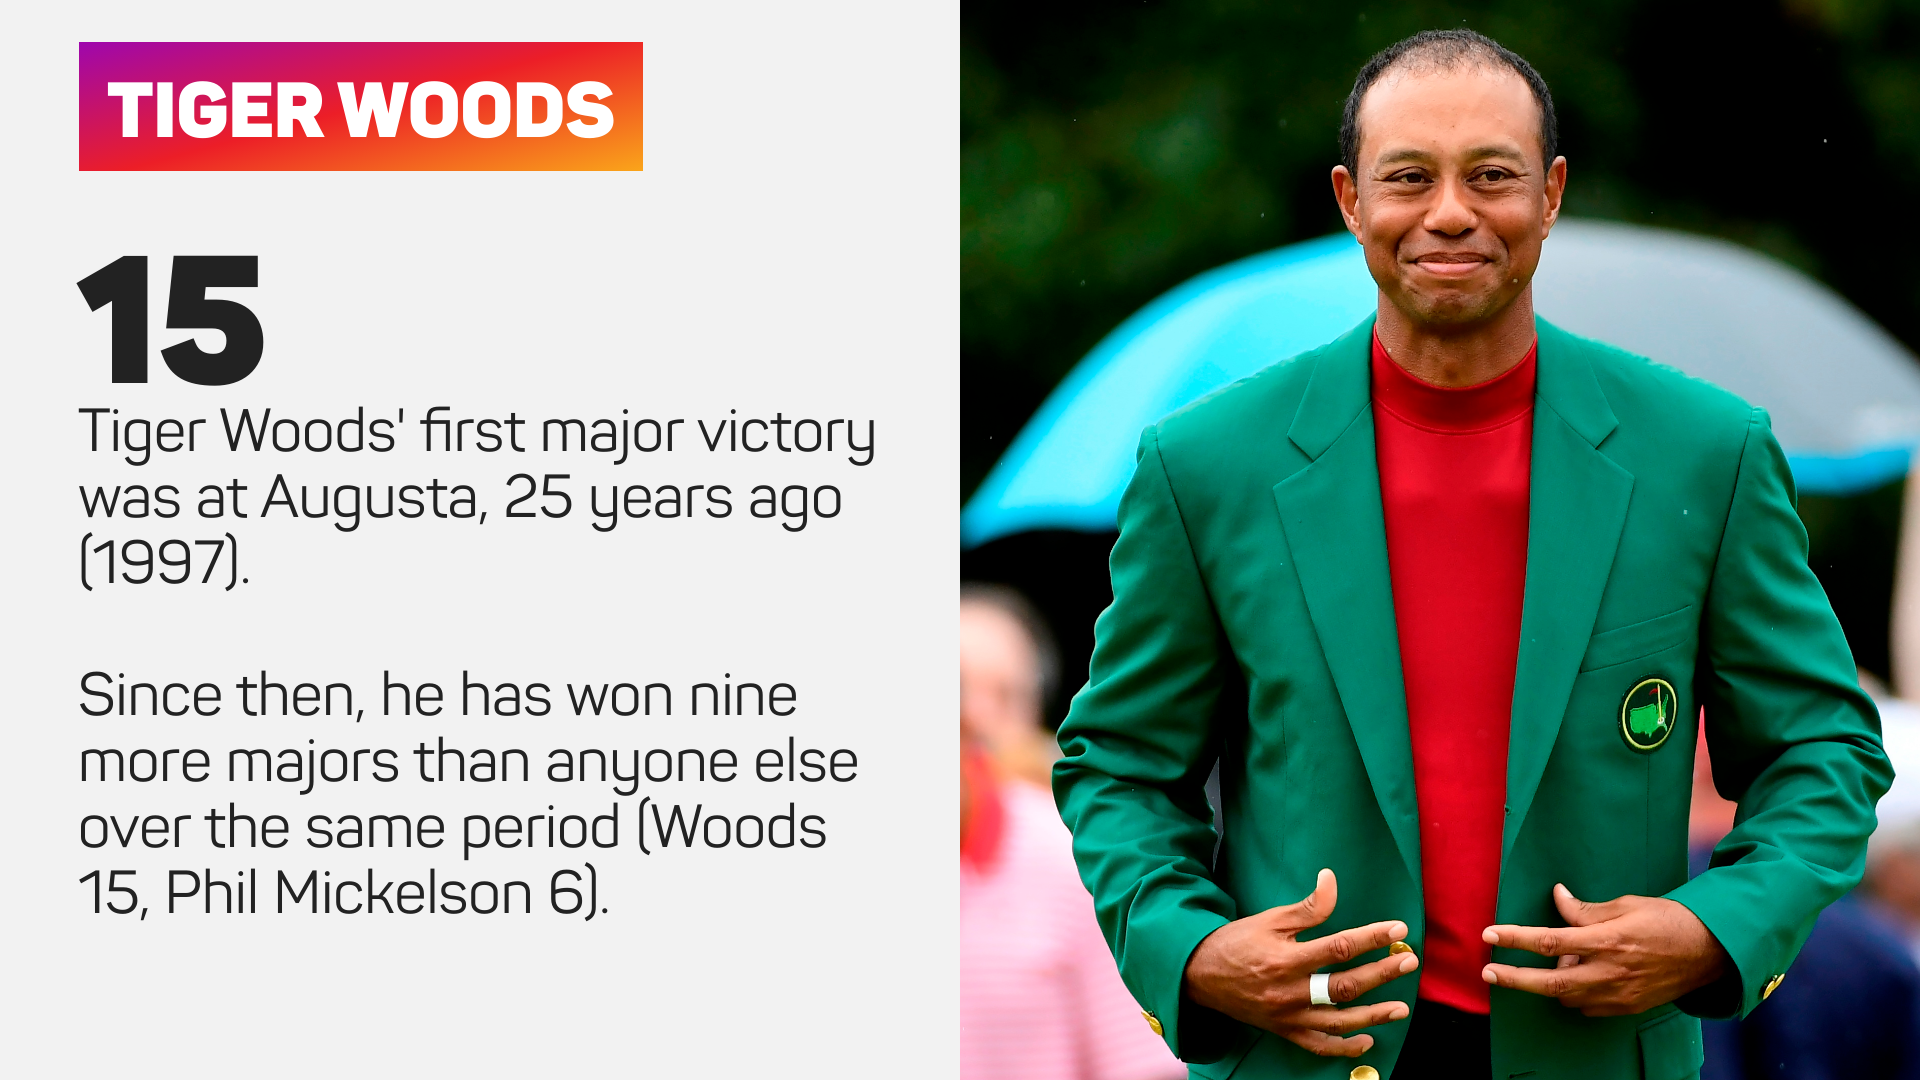 Tiger Woods has won The Masters on five occasions